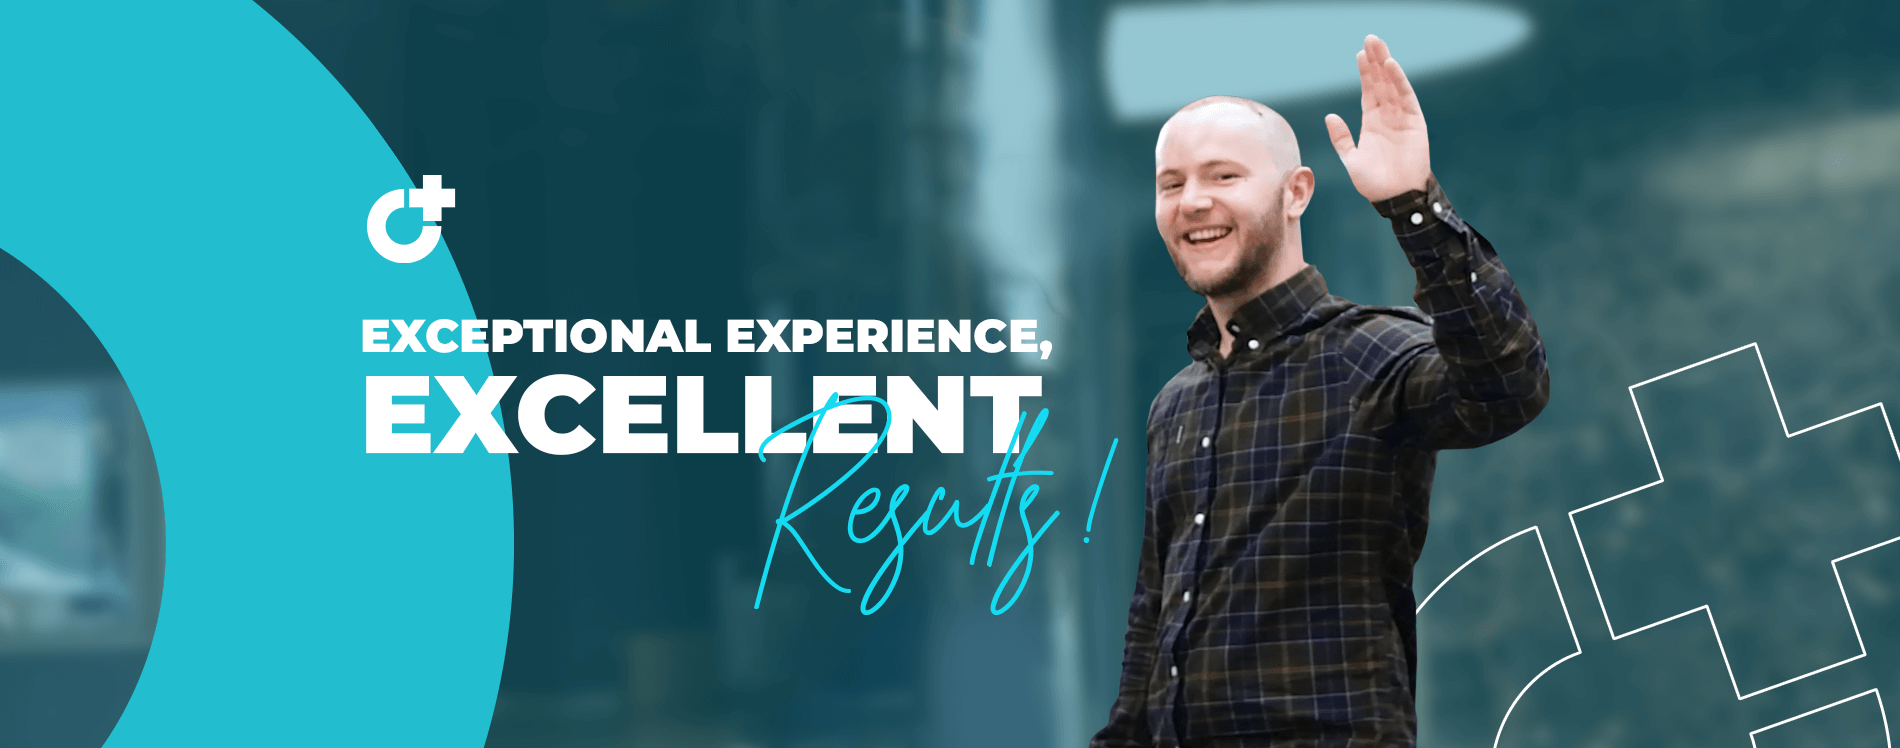 Exceptional Experience, Excellent Results!